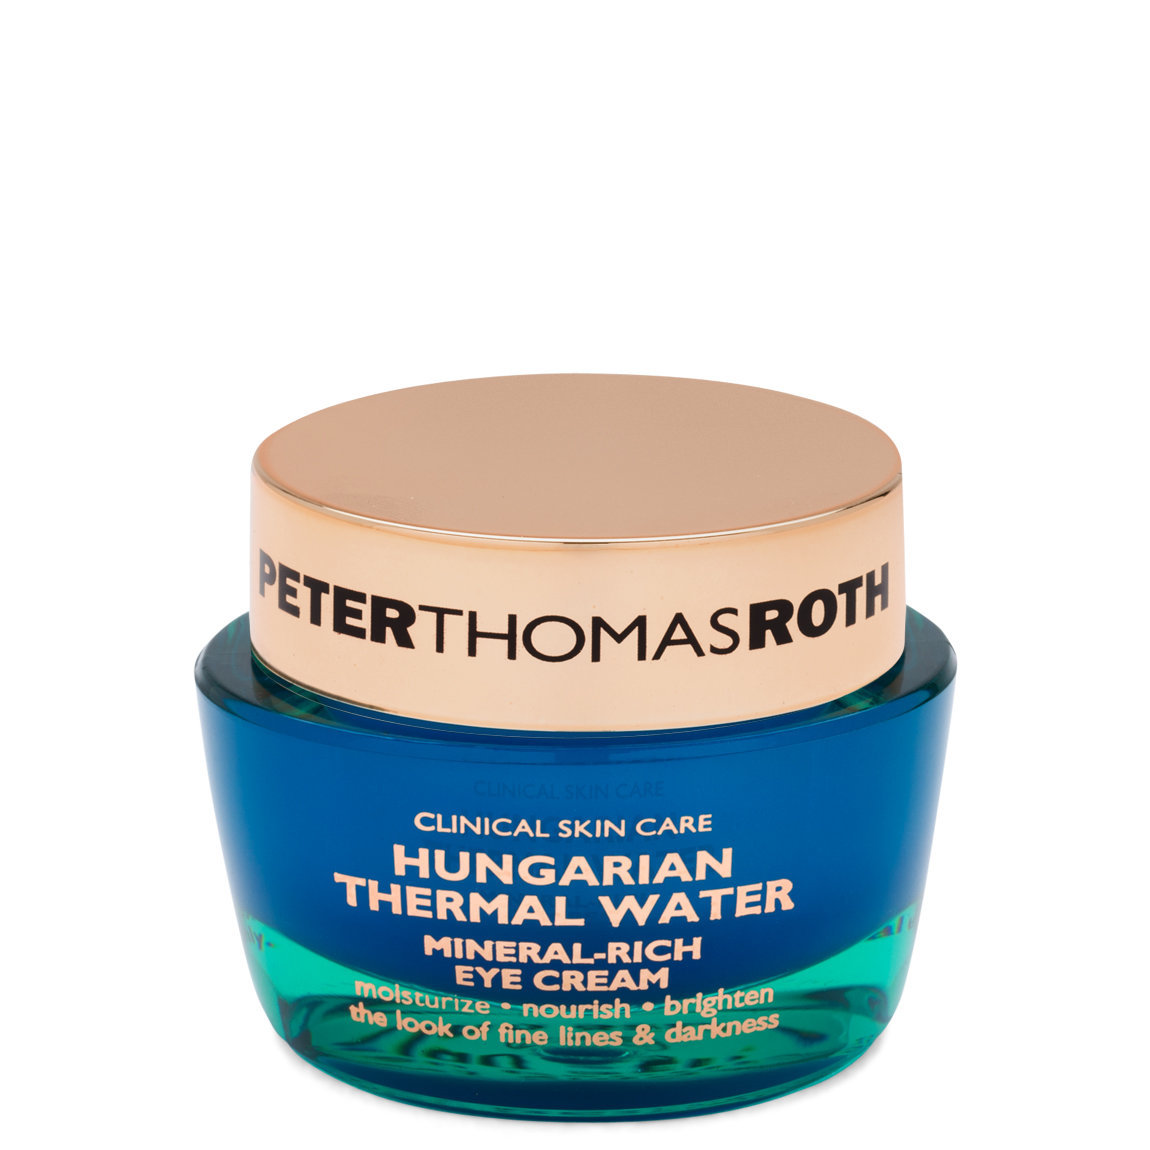 Peter Thomas Roth Hungarian Thermal Water Mineral-Rich Eye Cream alternative view 1 - product swatch.